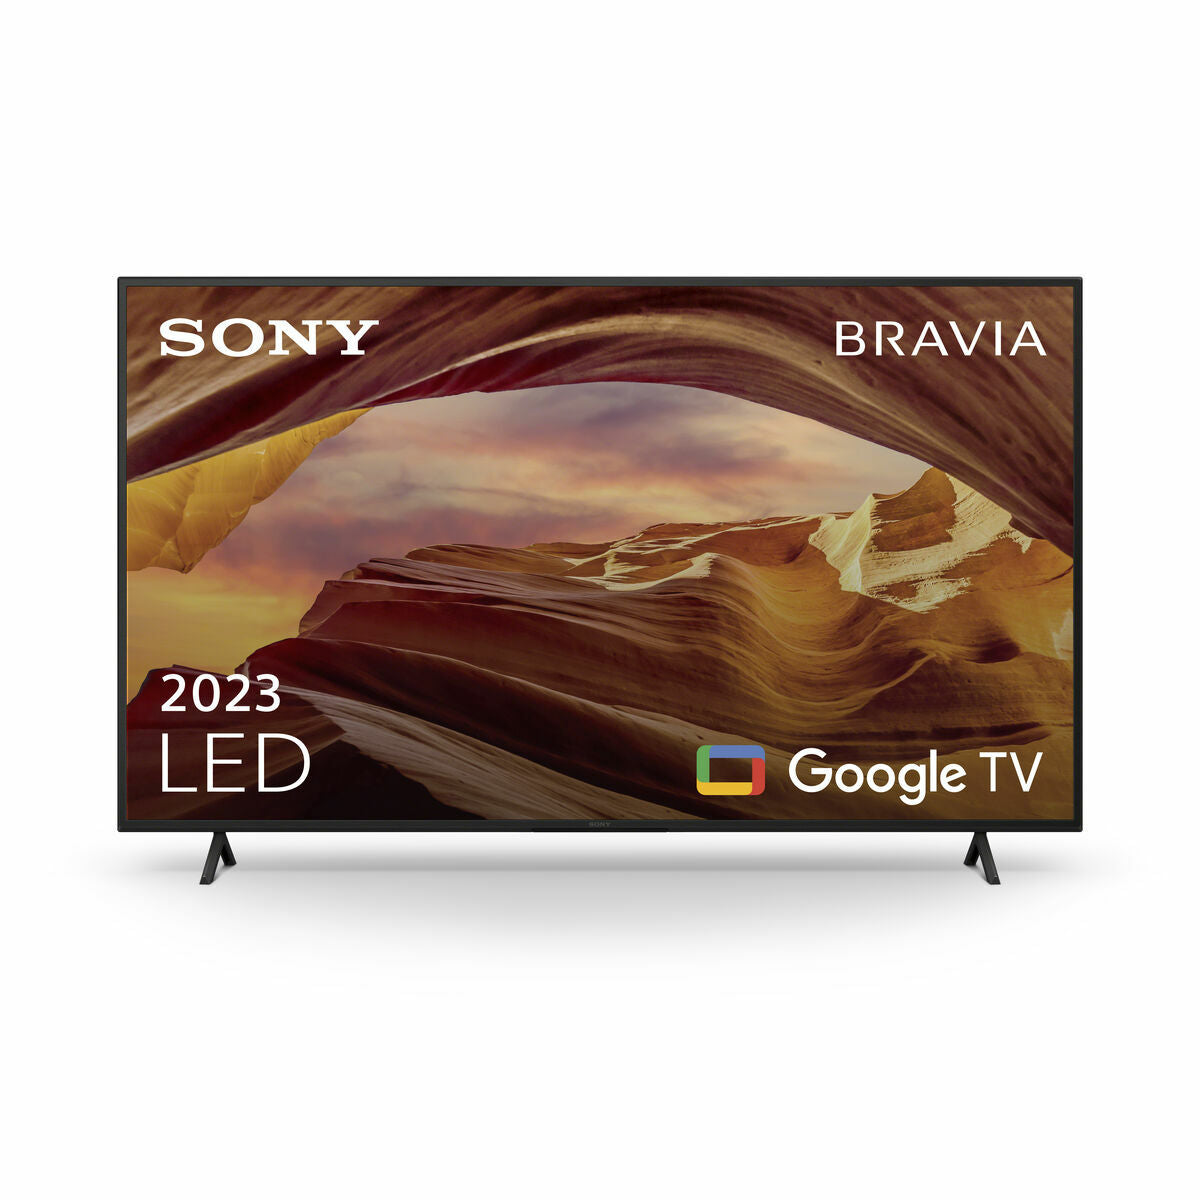 Television Sony KD55X75WLAEP 55" LED 4K Ultra HD, Sony, Electronics, TV, Video and home cinema, television-sony-kd55x75wlaep-55-led-4k-ultra-hd, :55 INCHES or 139.7 CM, :Ultra HD, Brand_Sony, category-reference-2609, category-reference-2625, category-reference-2931, category-reference-t-18805, category-reference-t-19653, cinema and television, Condition_NEW, entertainment, Price_800 - 900, RiotNook